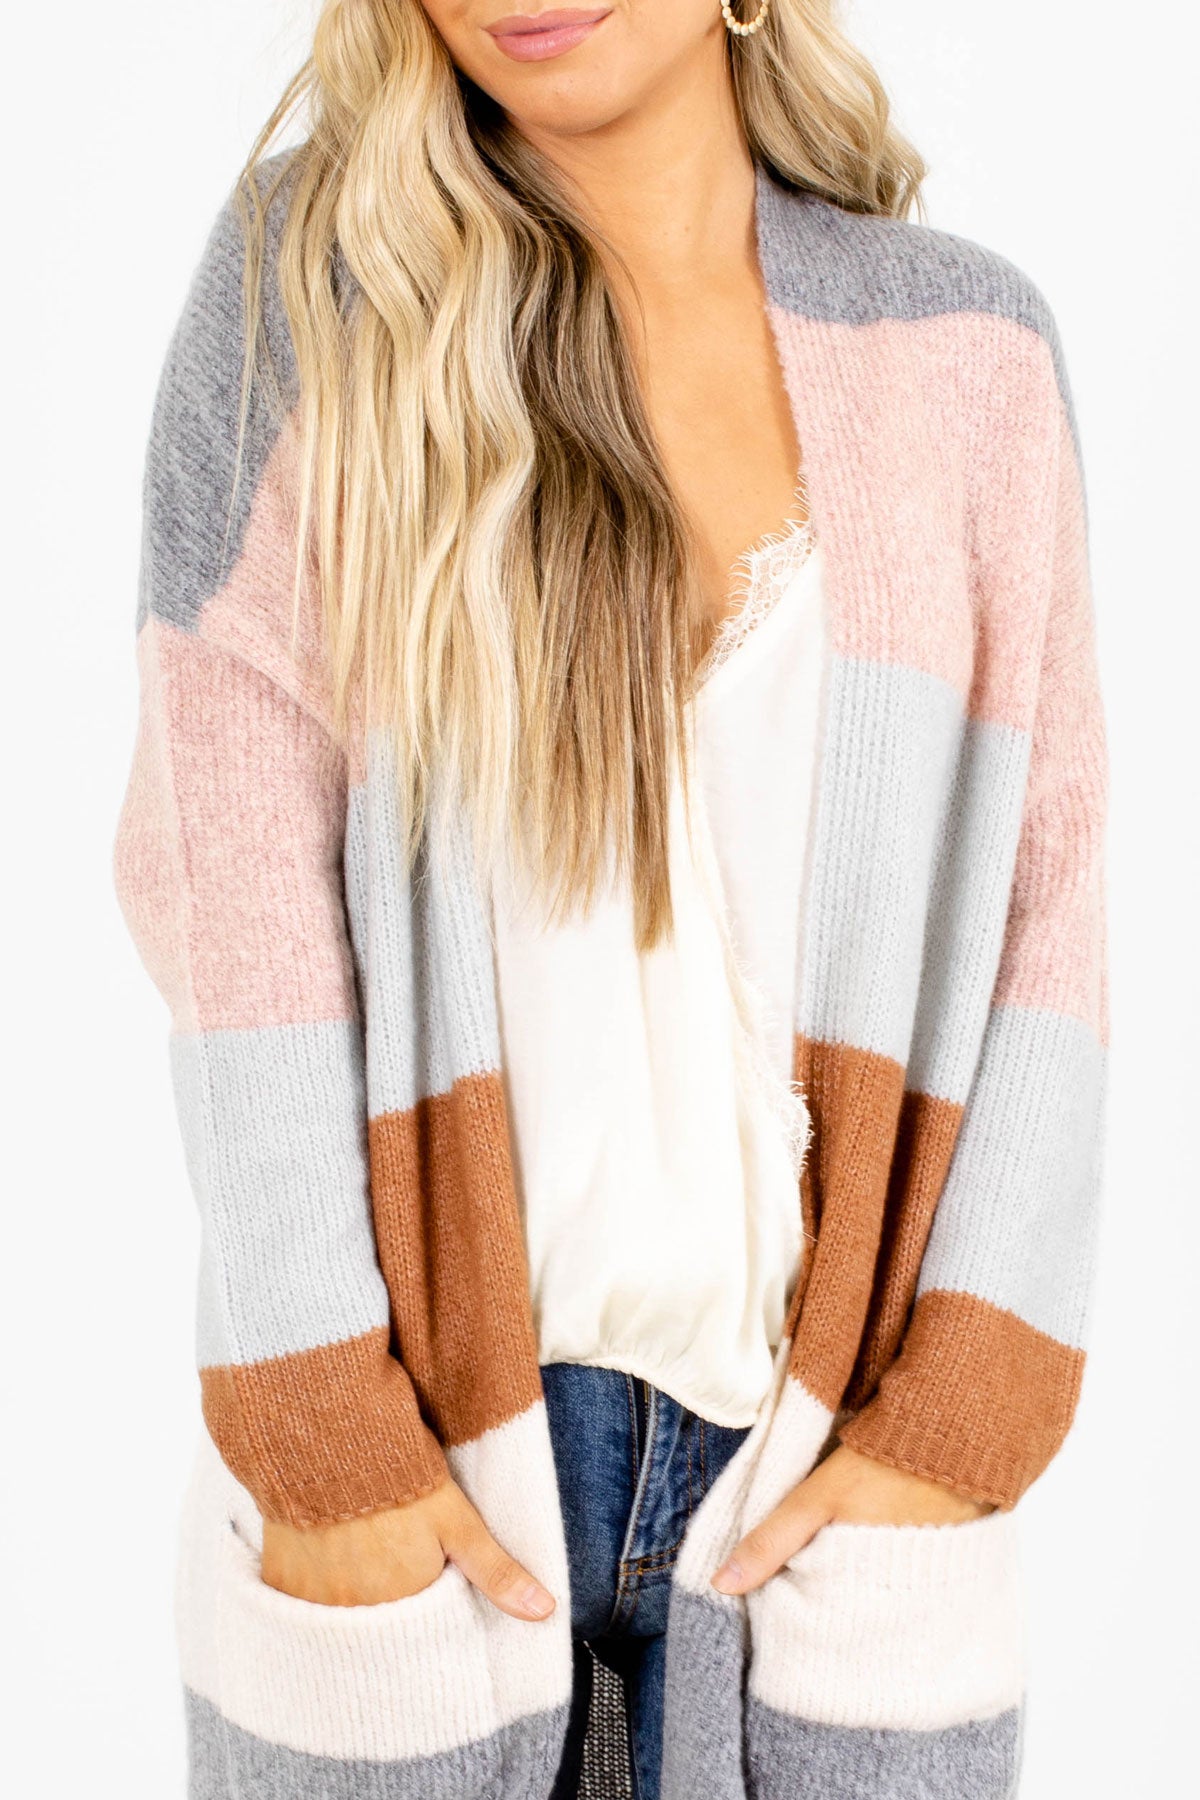 Soft Cardigan with Pockets for Women